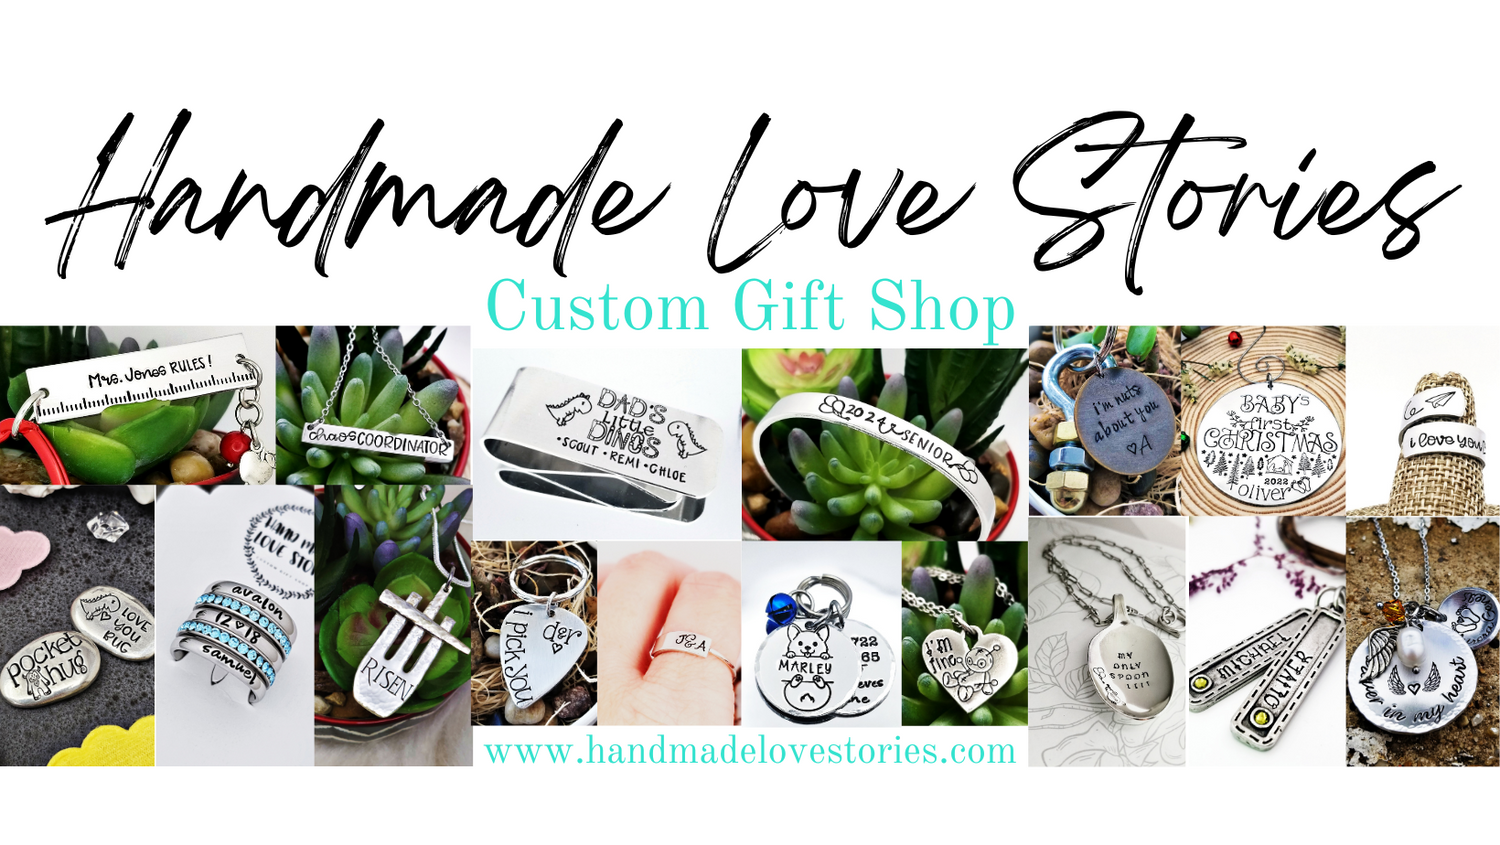 Come fall in love in with custom